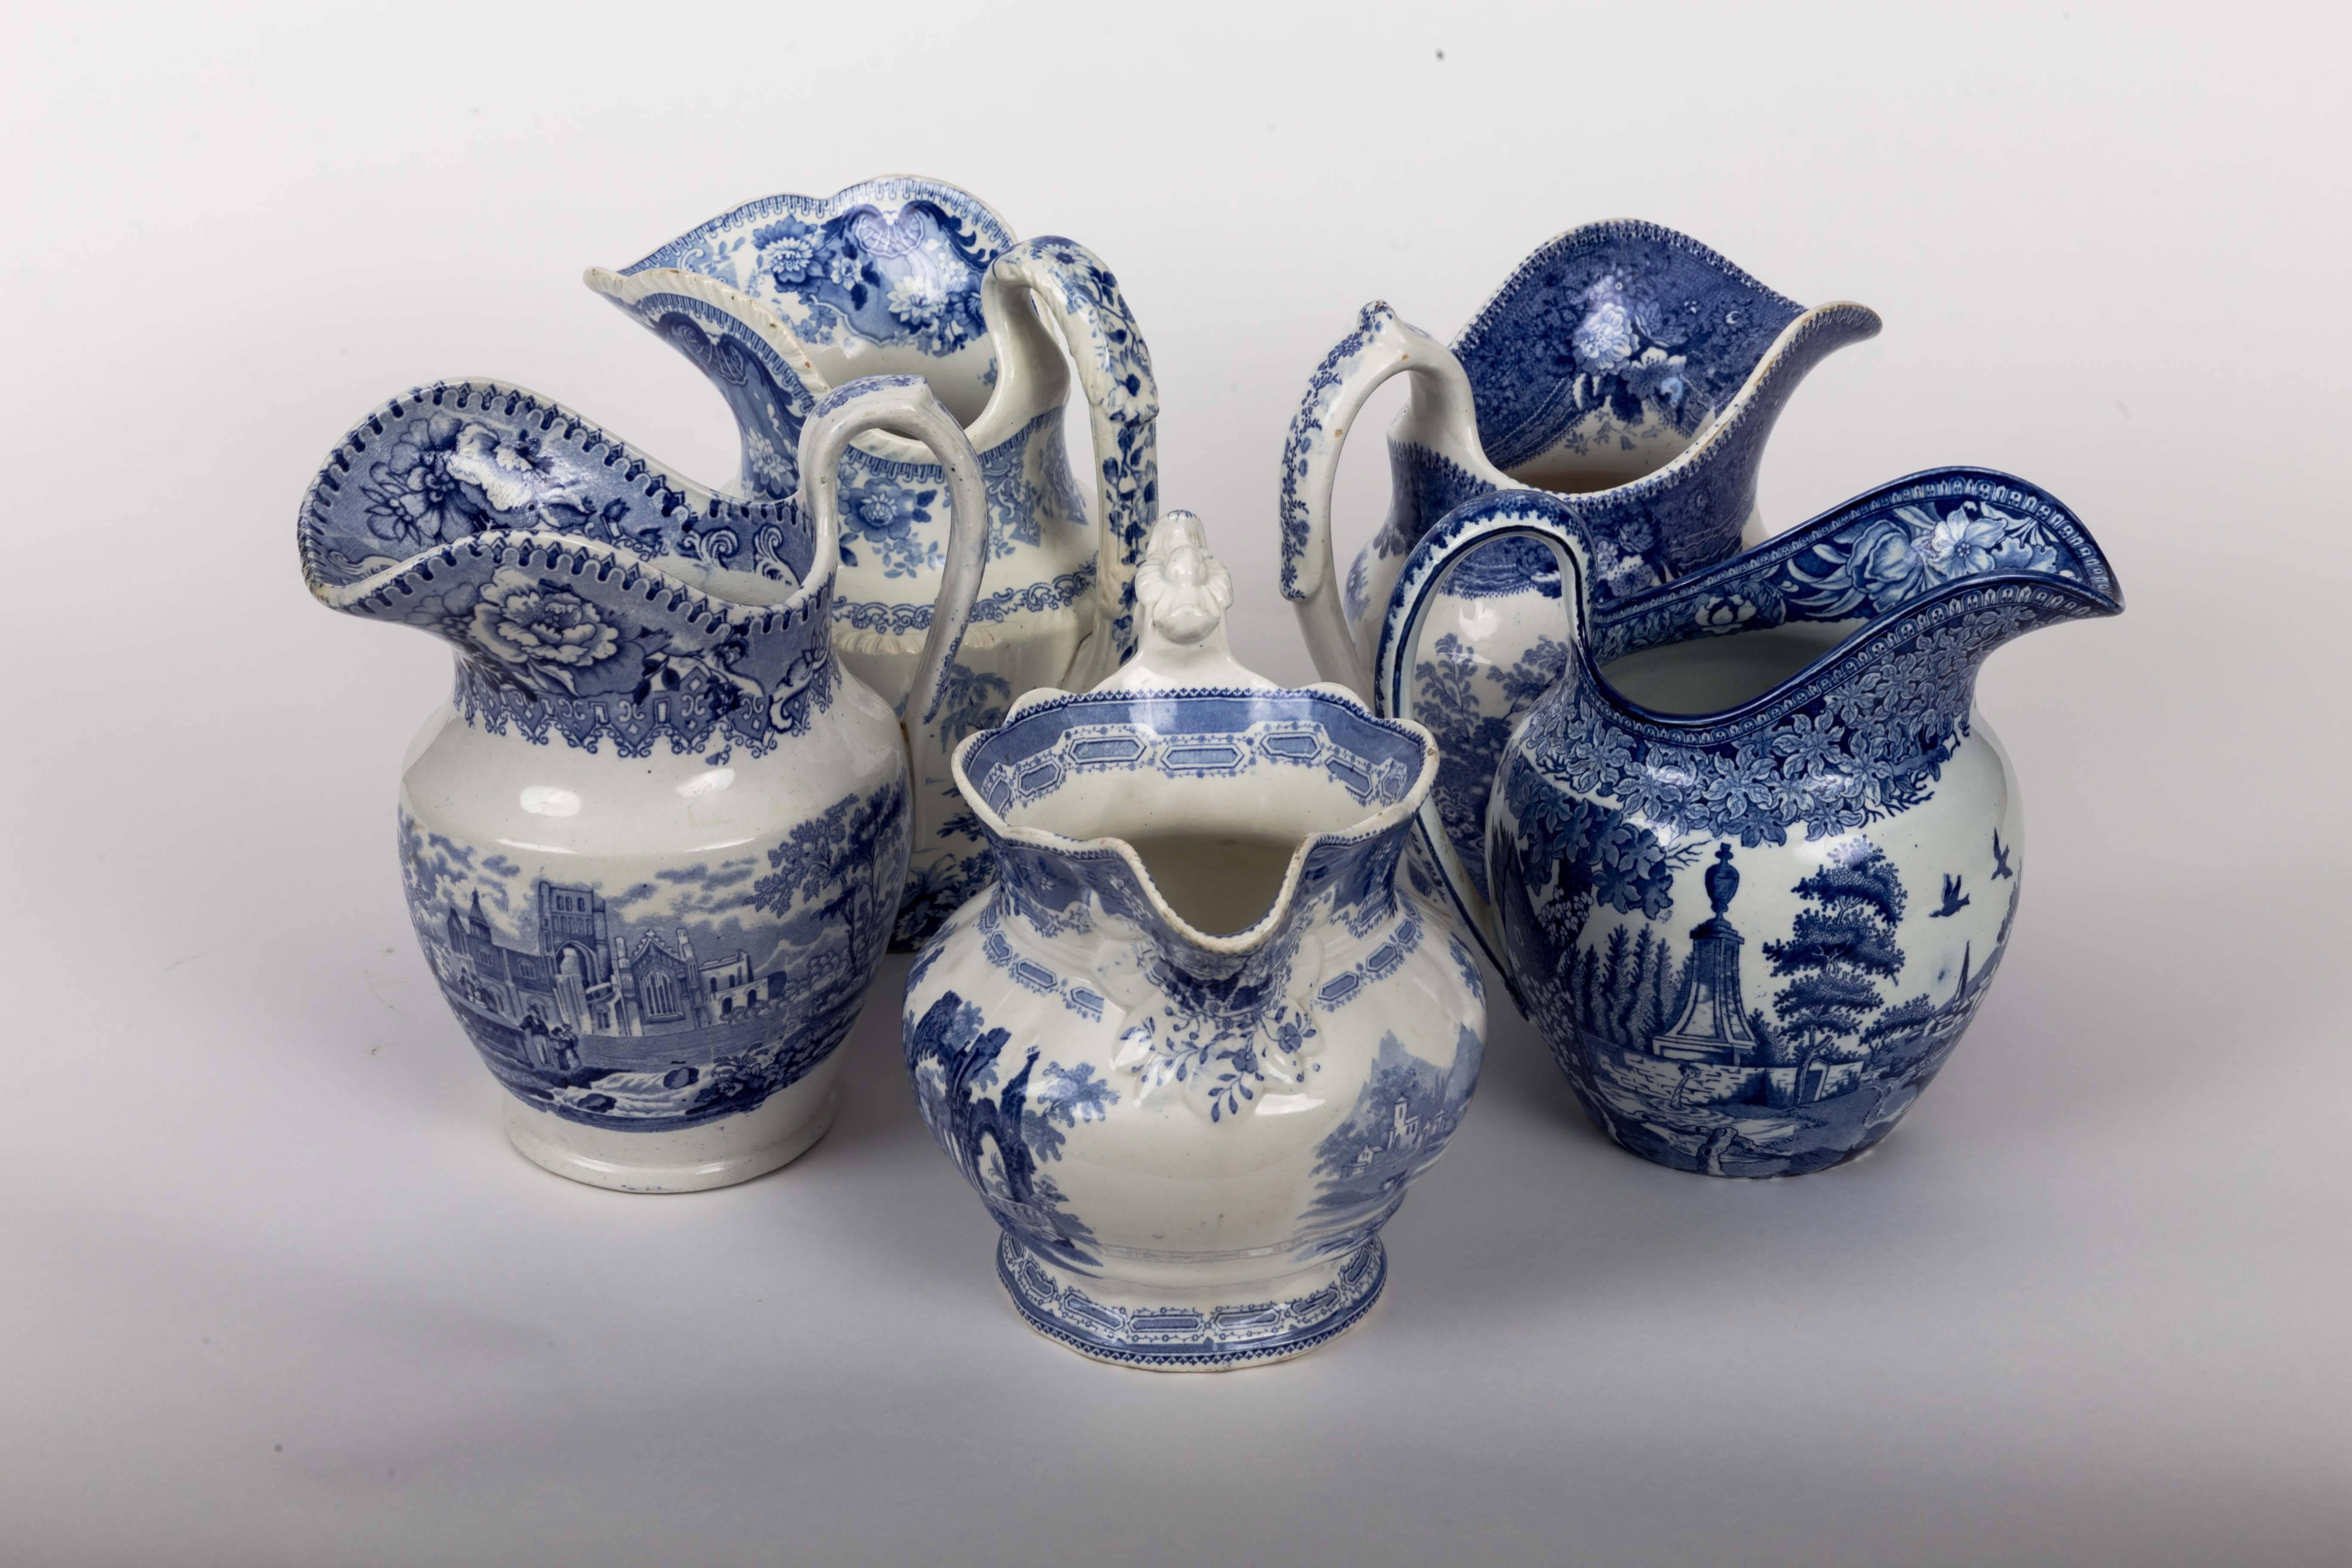 Various dimensions.
Blue and white Staffordshire jugs.